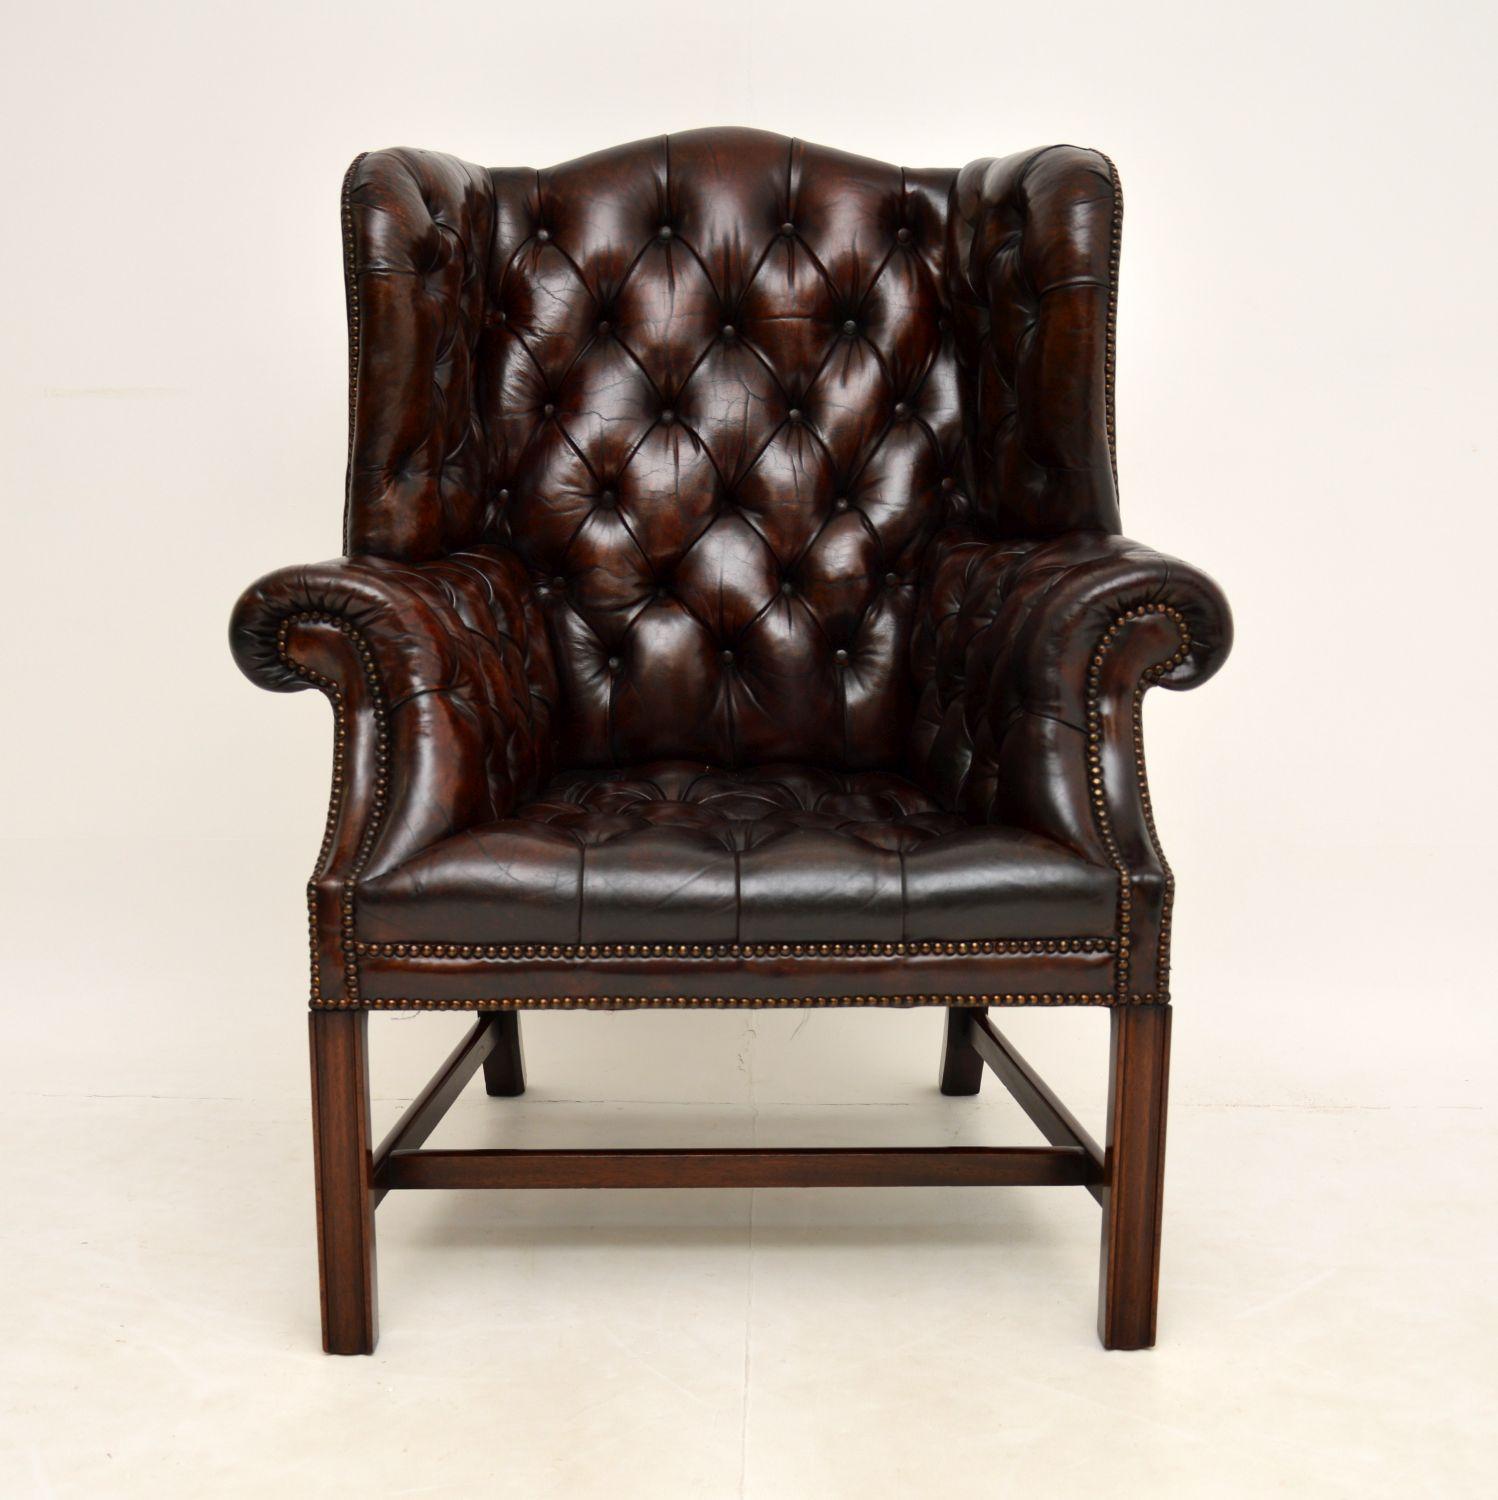 An absolutely stunning antique leather wing back armchair on a solid mahogany base. This is of the utmost quality, it dates from the 1900-1920 period & is Chippendale style.

The design is gorgeous, with a humped back and shapely sides, deep